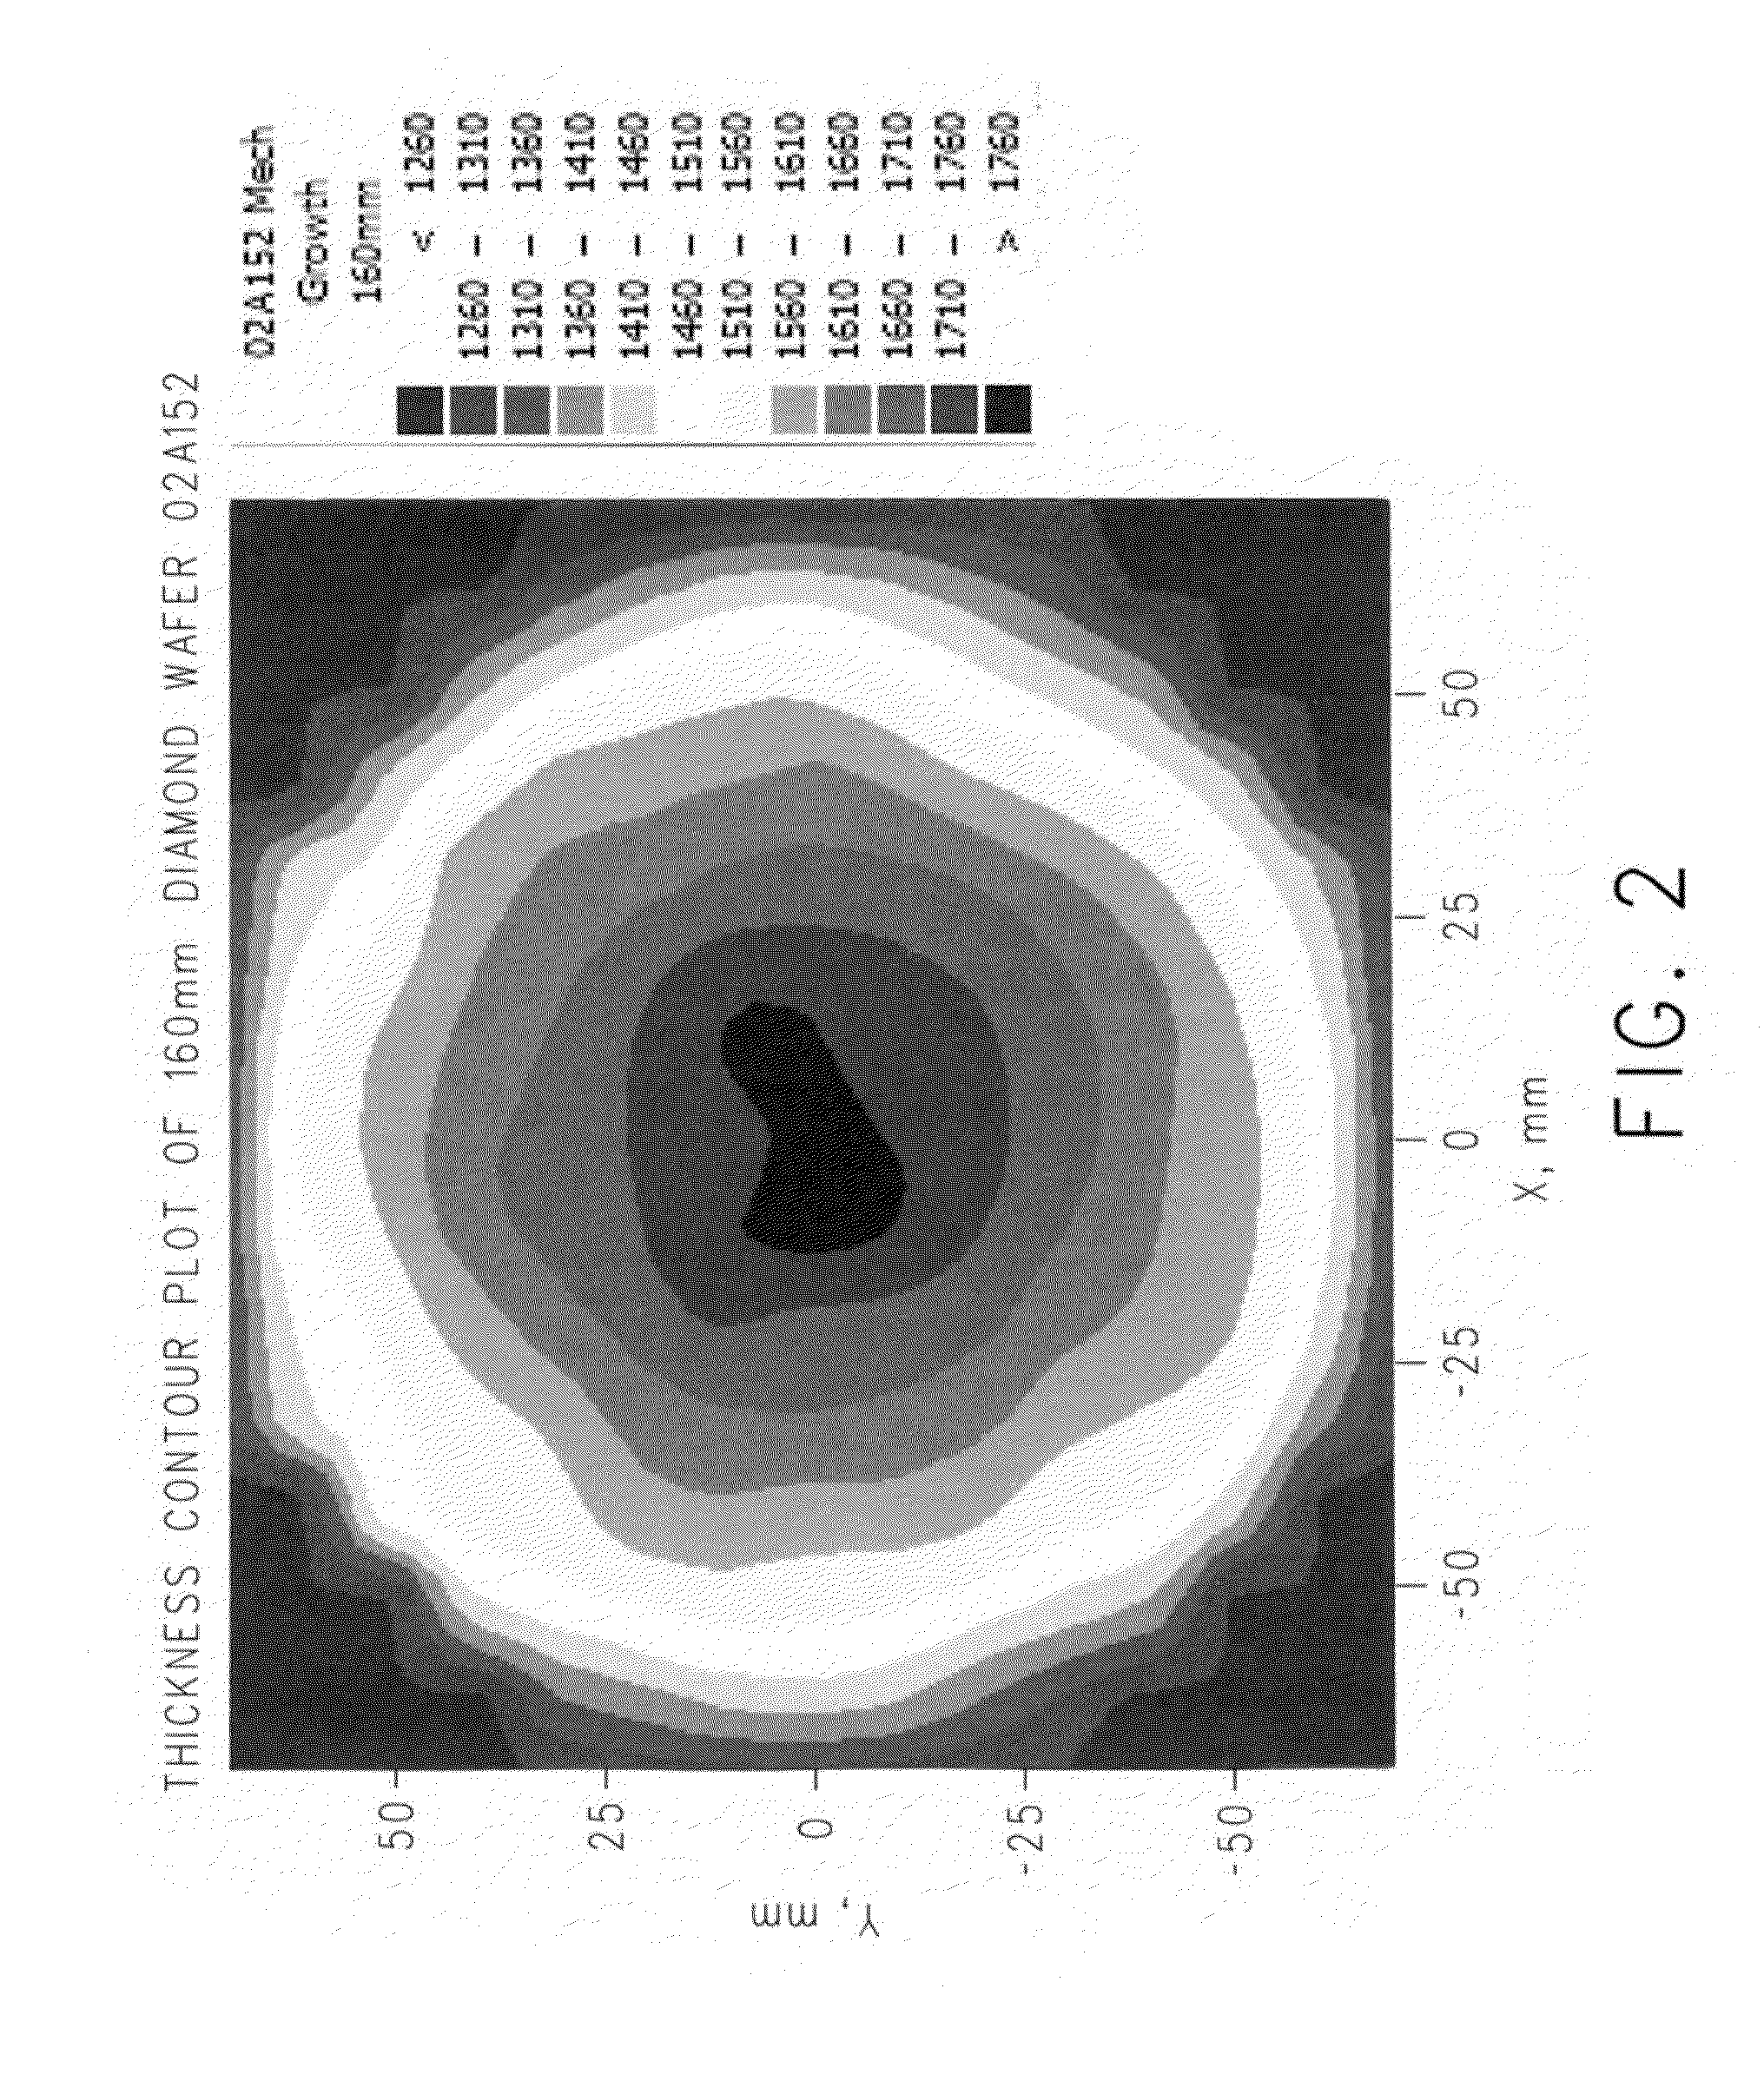 Highly Twinned, Oriented Polycrystalline Diamond Film and Method of Manufacture Thereof